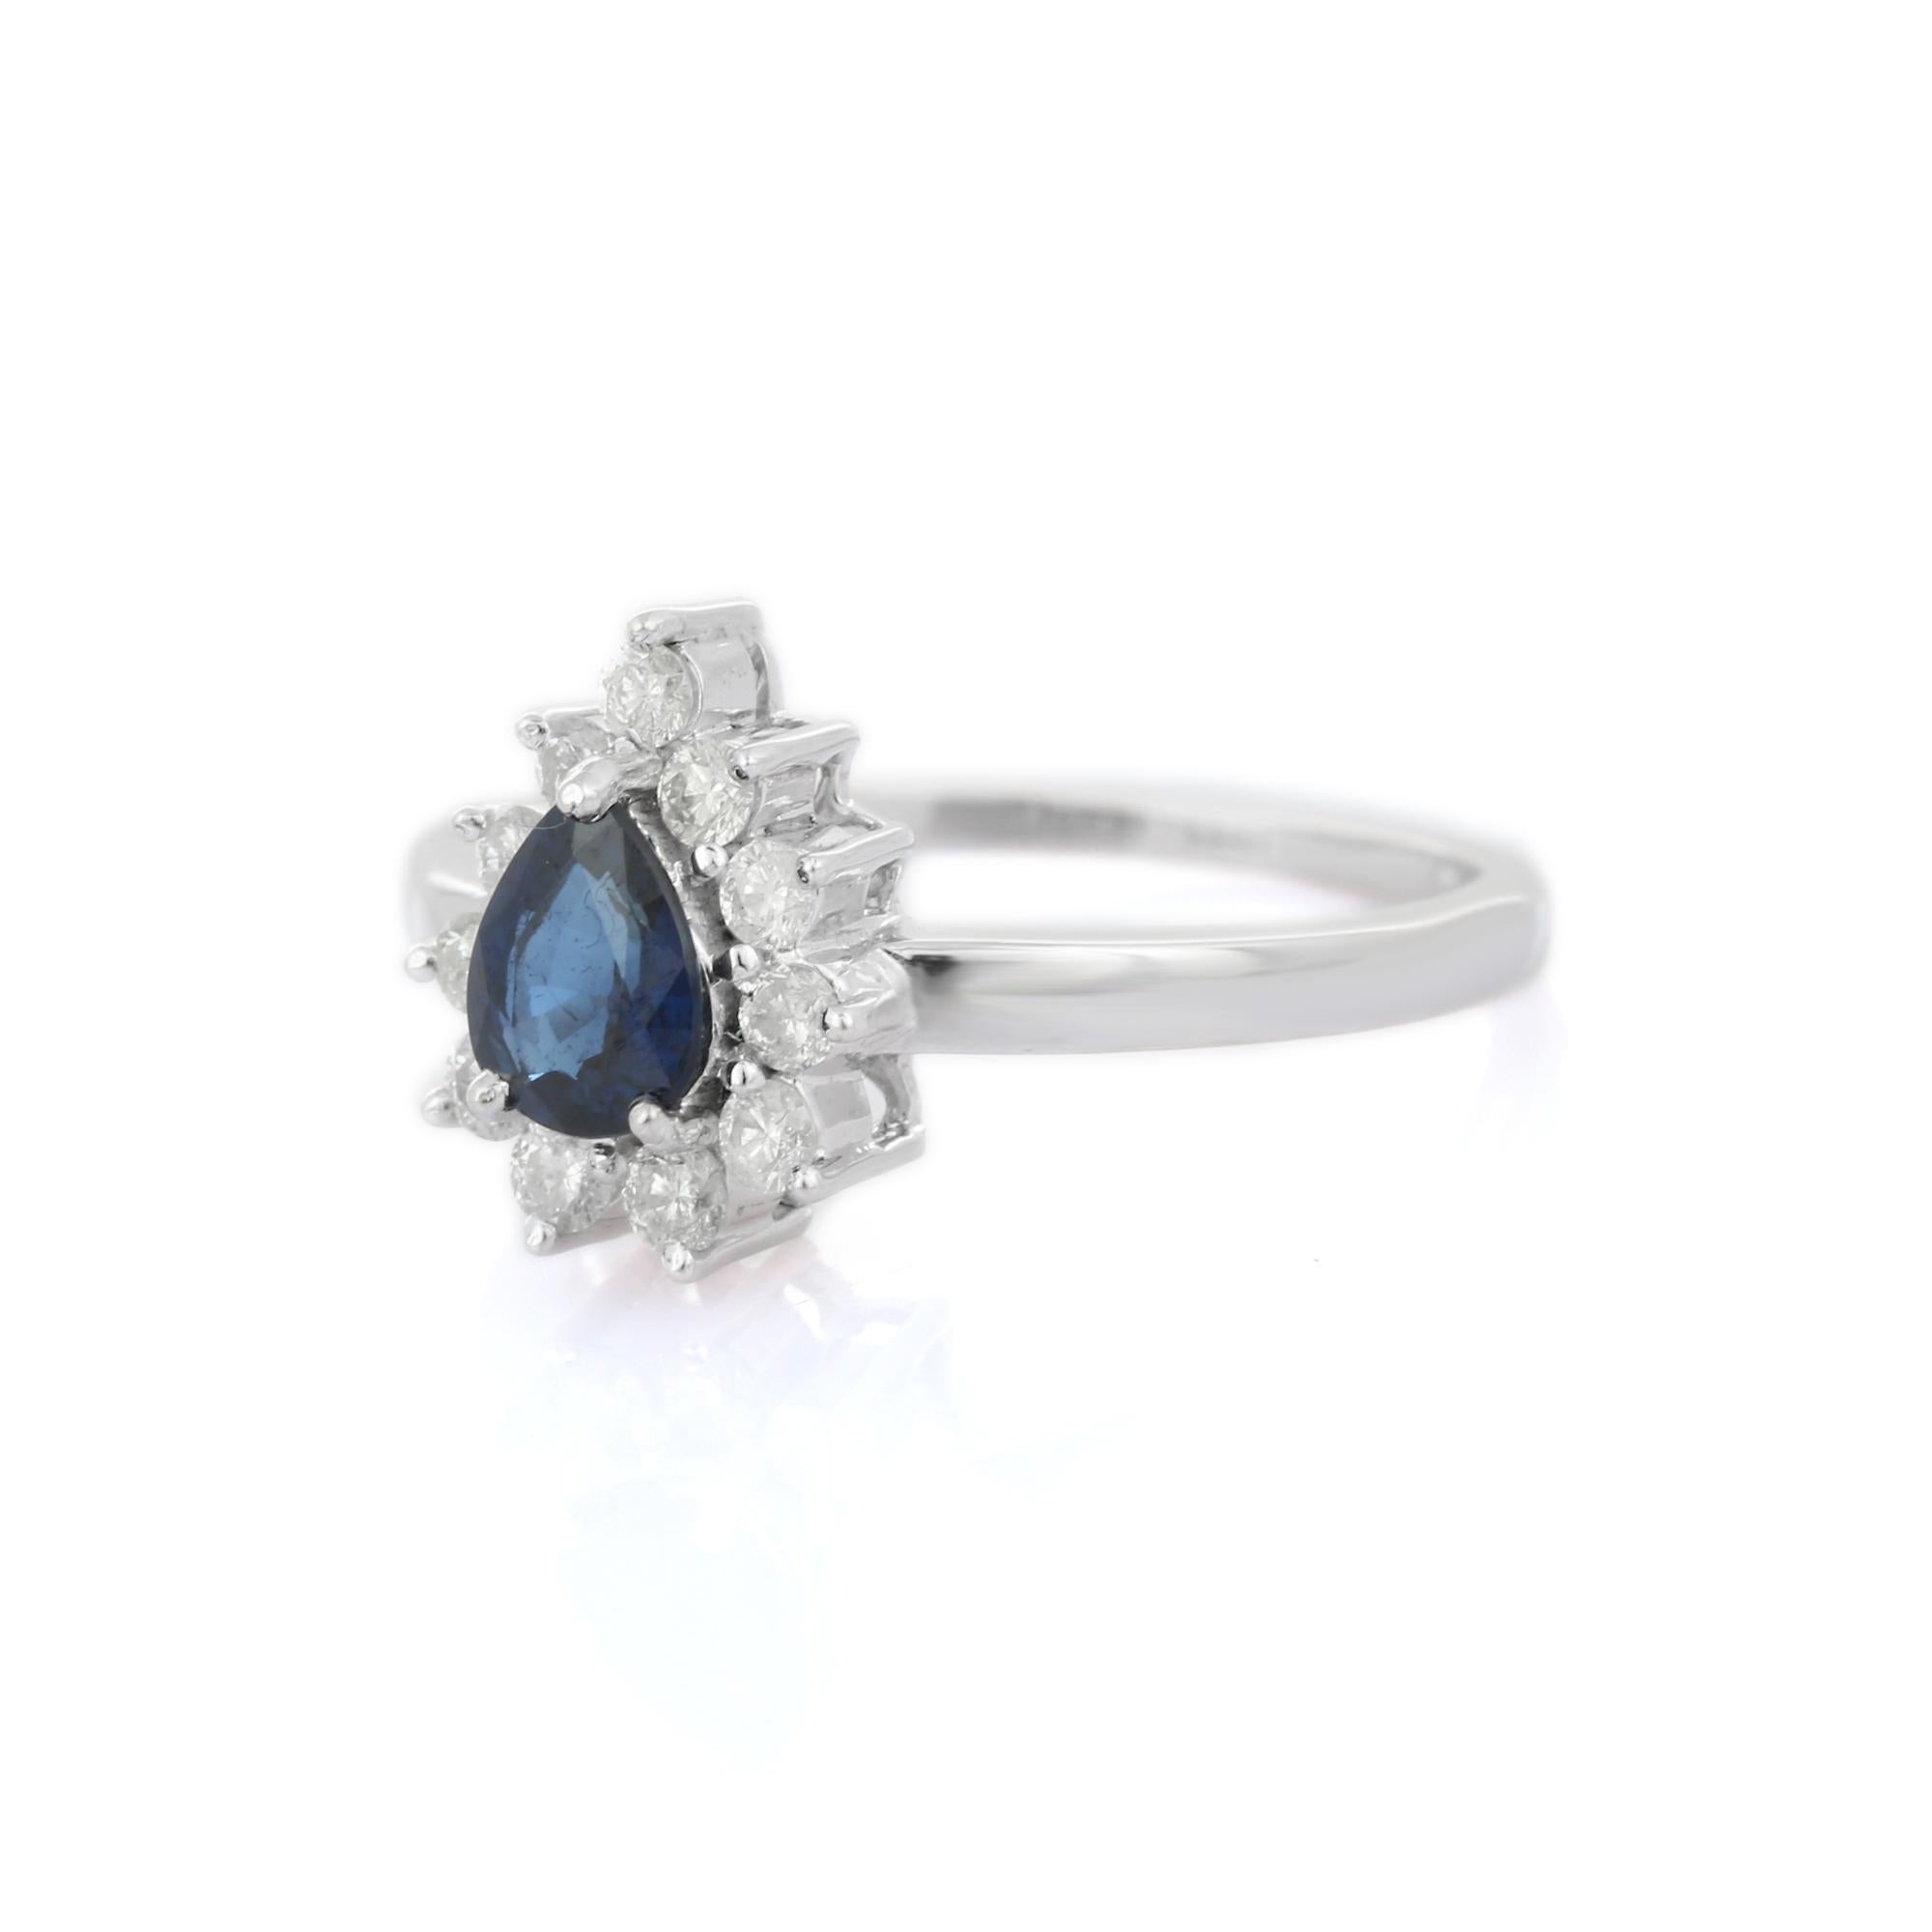 For Sale:  Handcrafted 14K White Gold Pear Cut Blue Sapphire and Halo Diamond Ring 3